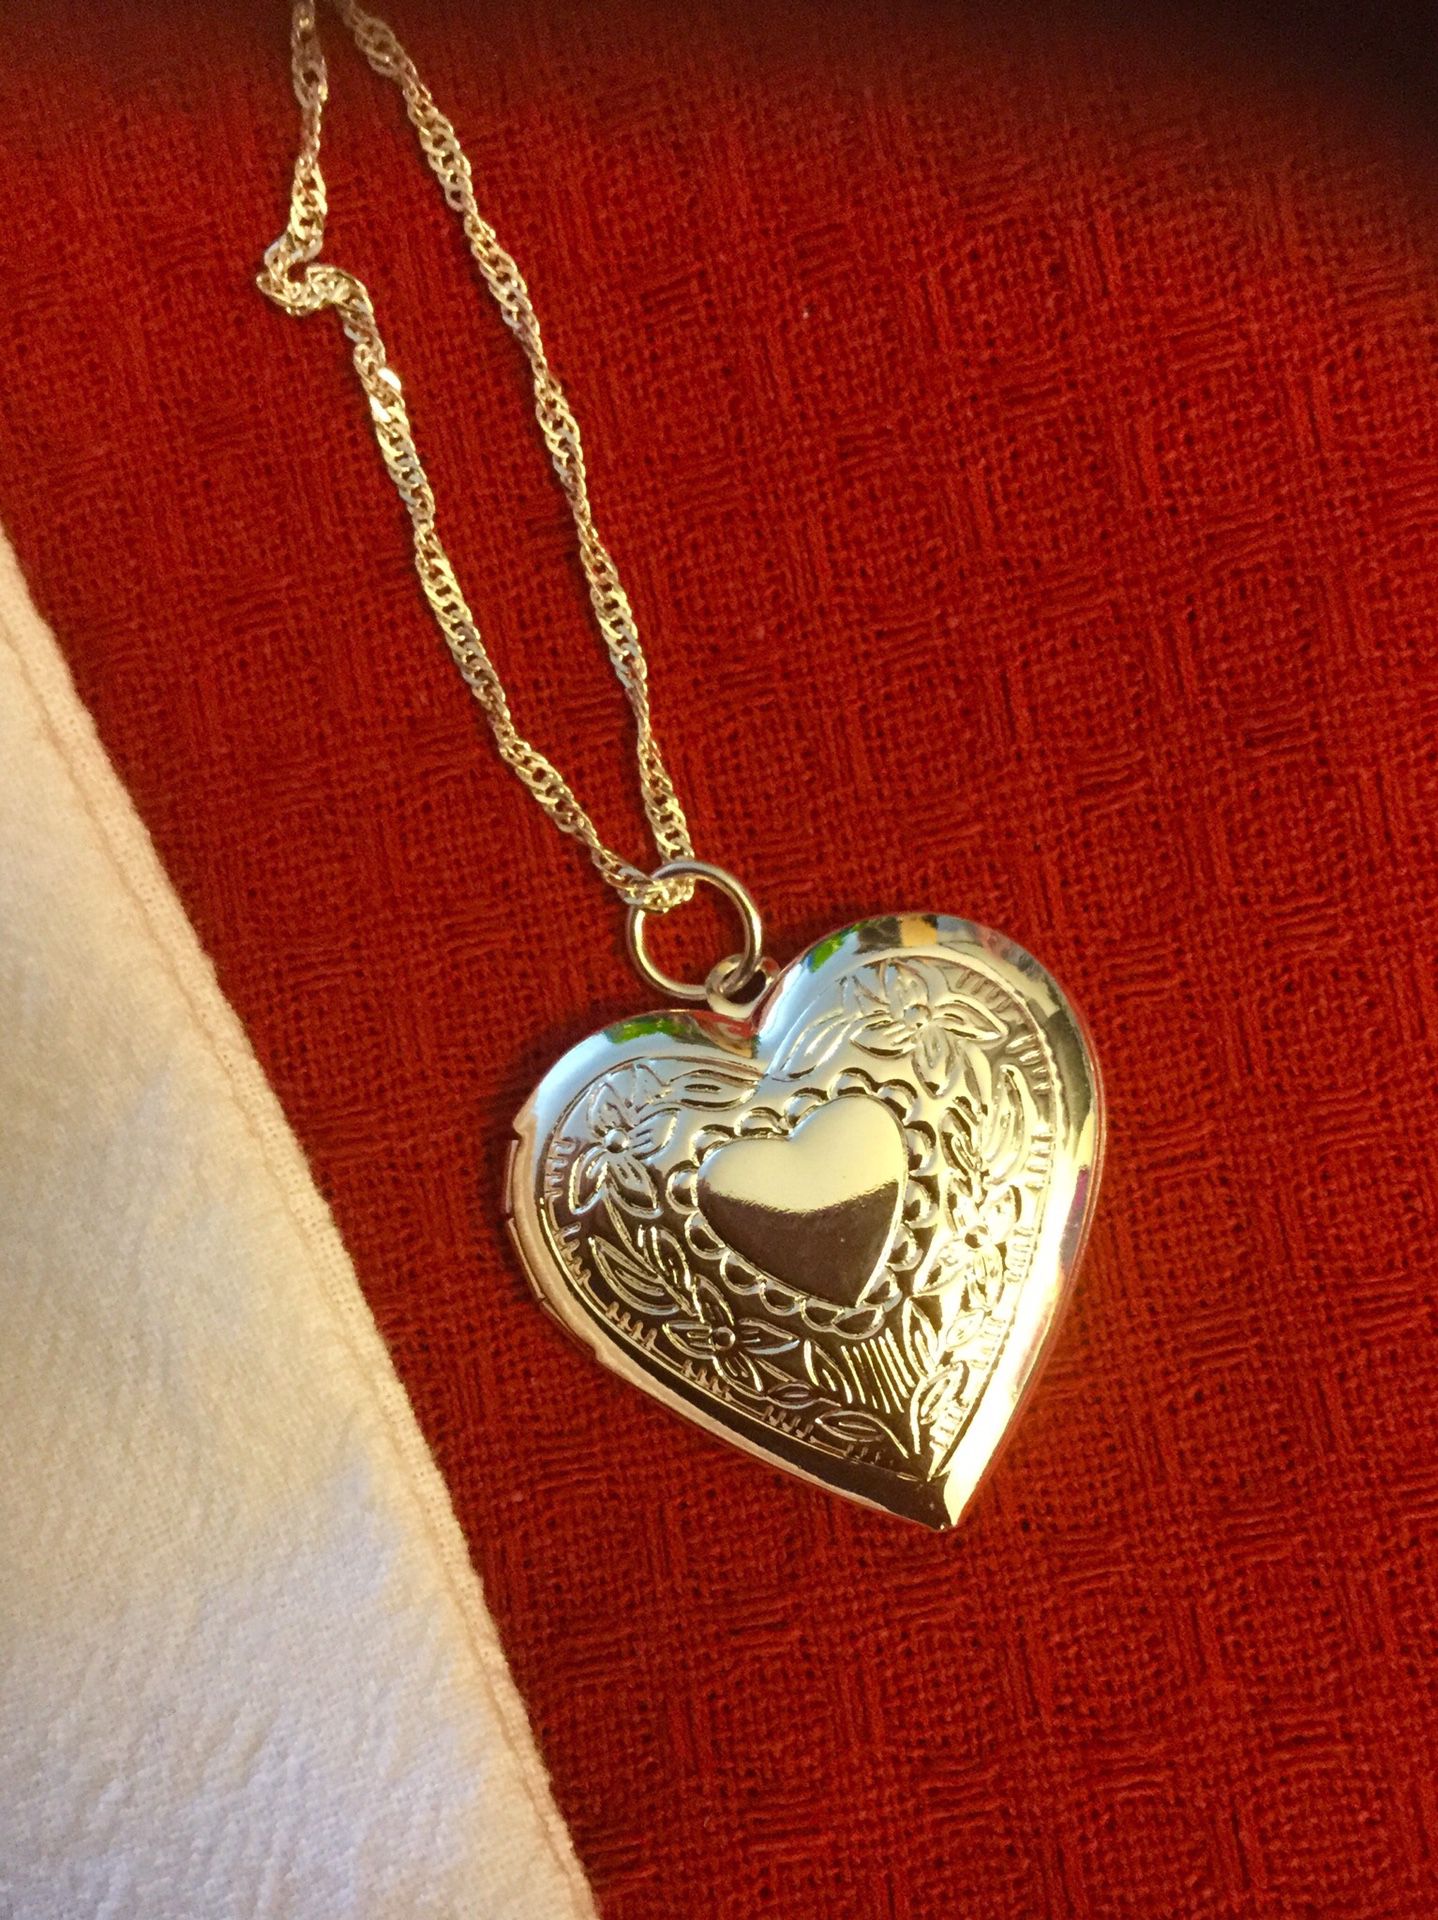 Lovely Heart pendant necklace 💛💖💛 Sterling Silver 925 Jewelry 💖💛💖 Locket opens for photos , very nice new silver jewelry